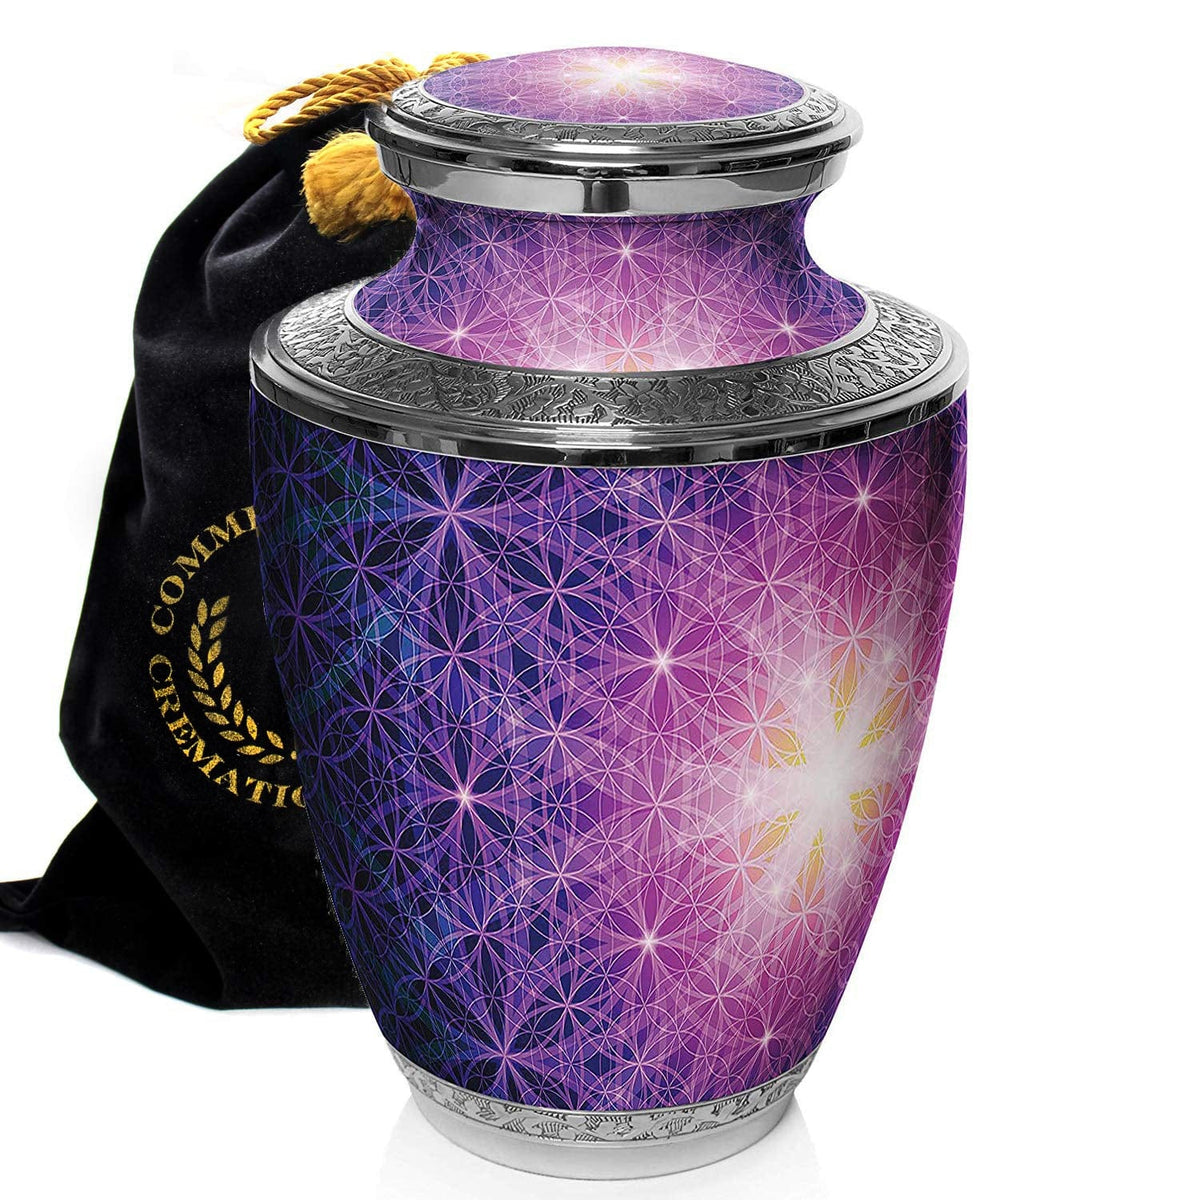 Commemorative Cremation Urns Home &amp; Garden Seed of Life Geometric Cremation Urn